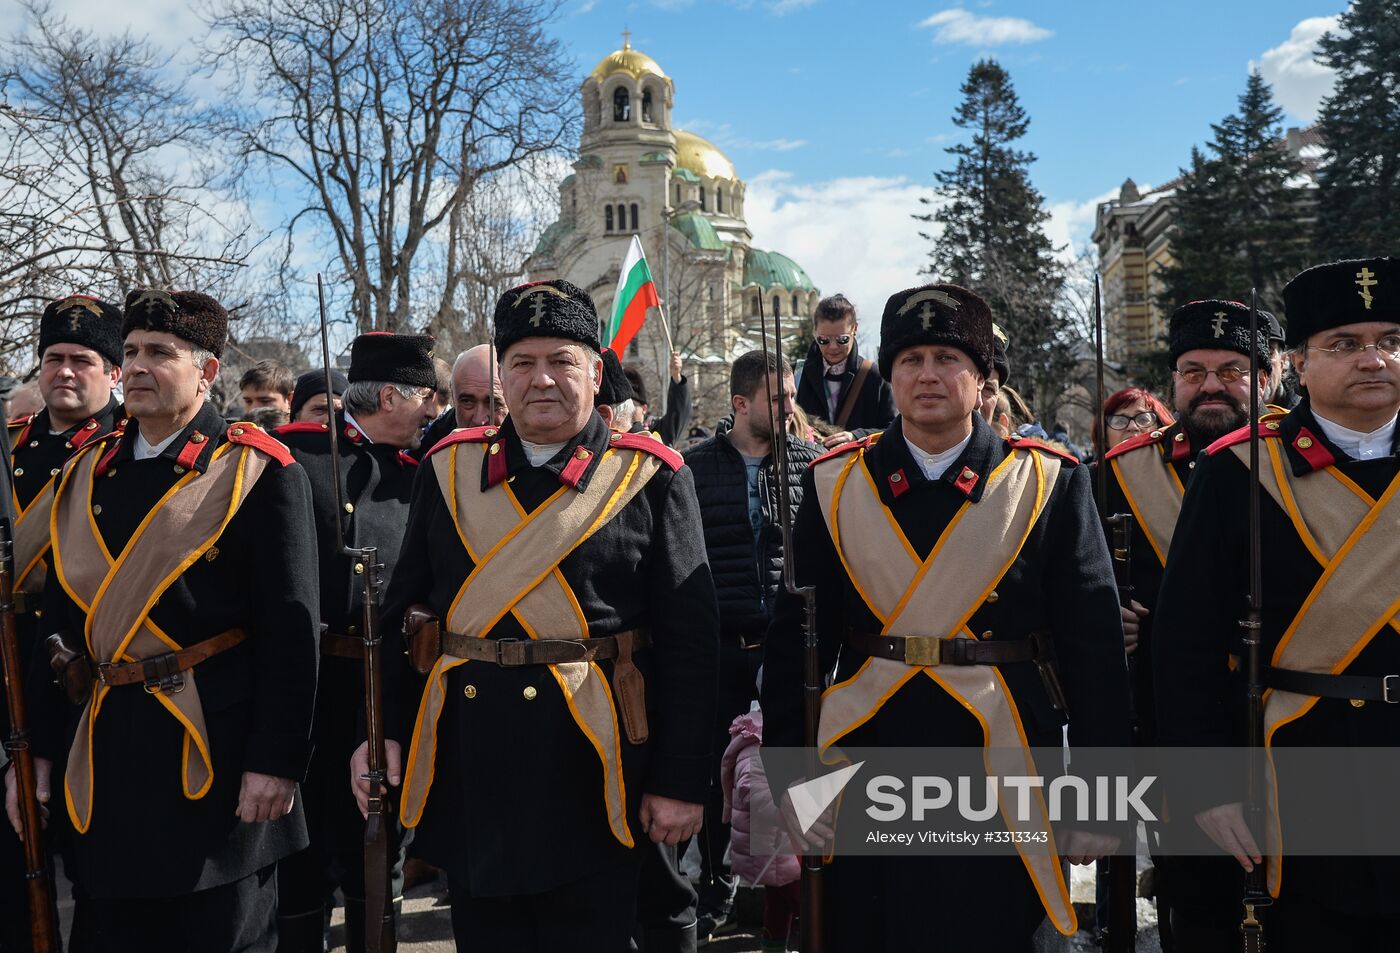 Celebrations of 140th anniversary of Bulgaria's liberation from Ottoman rule